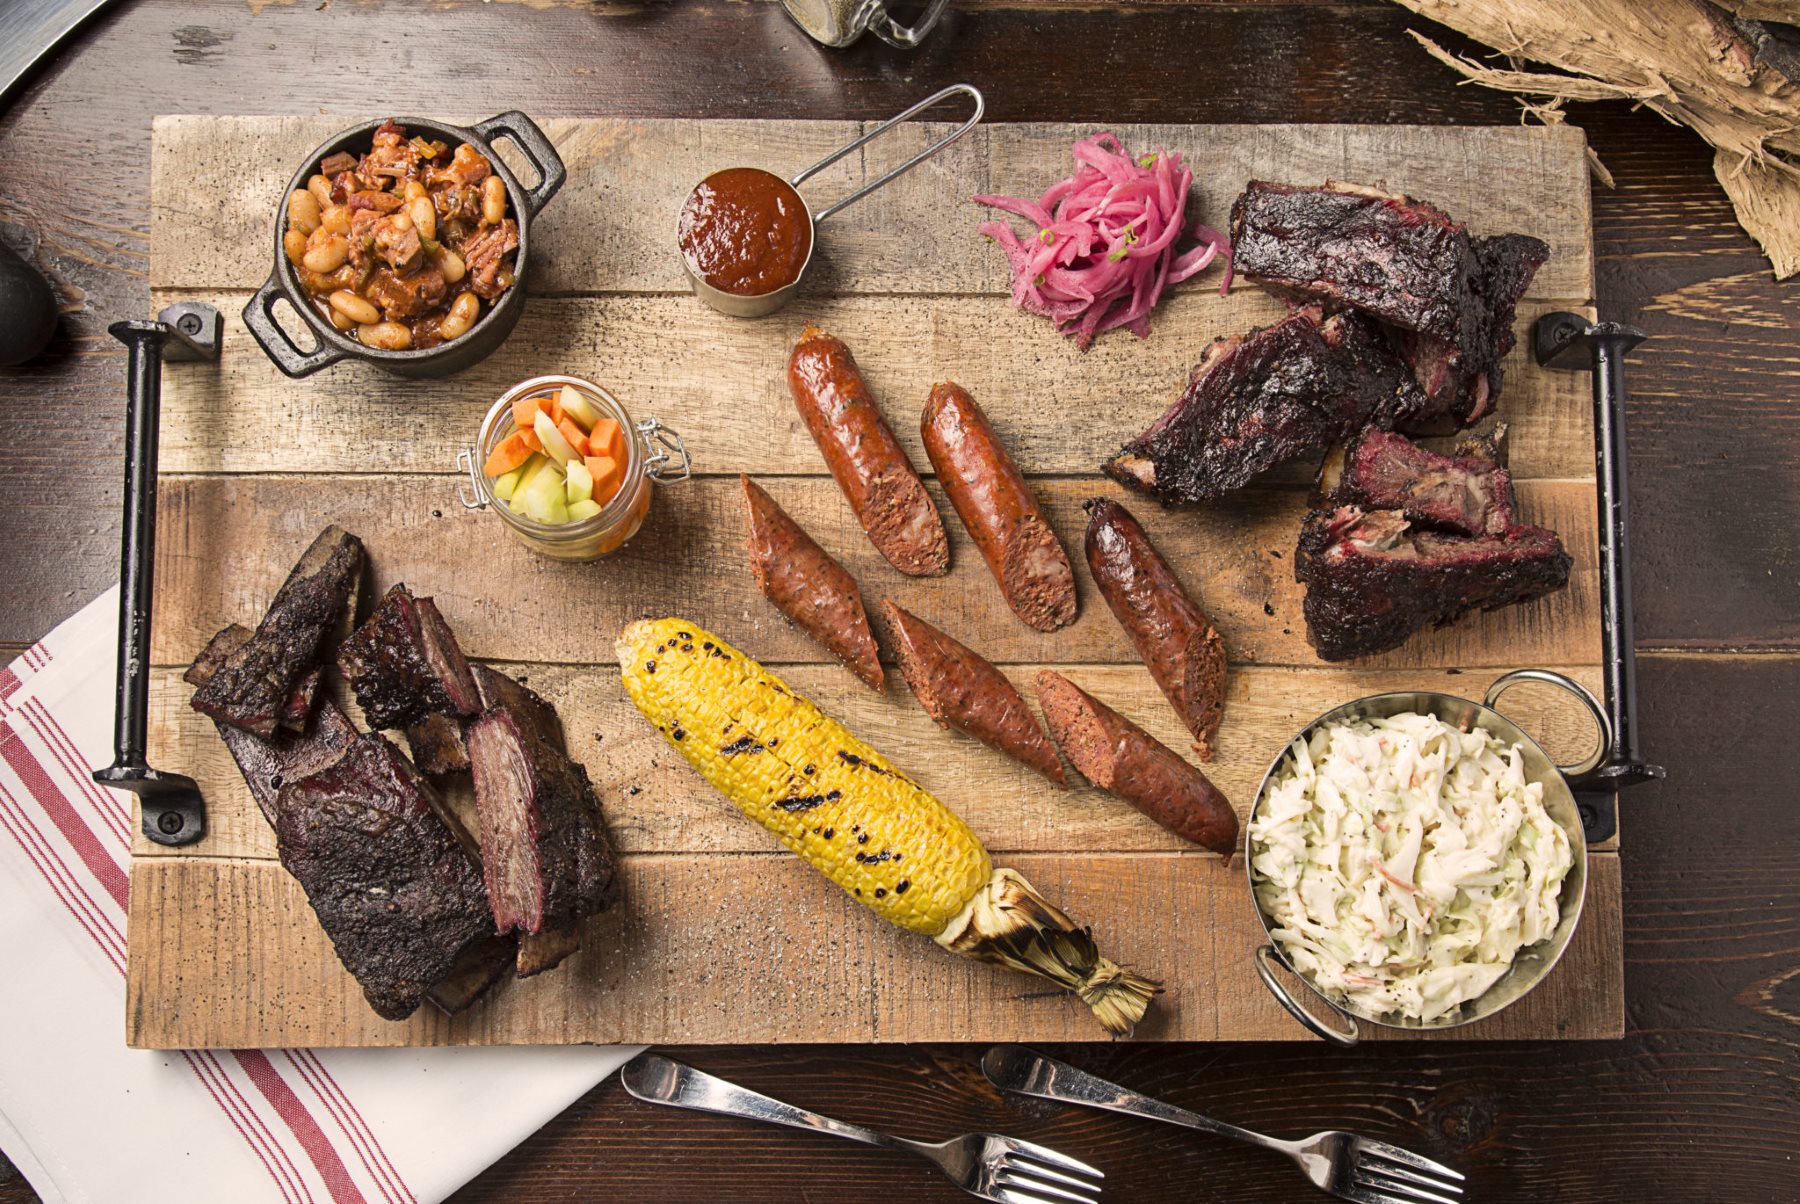 The BBQ restaurant Miami Aventura is Good with any Occasion